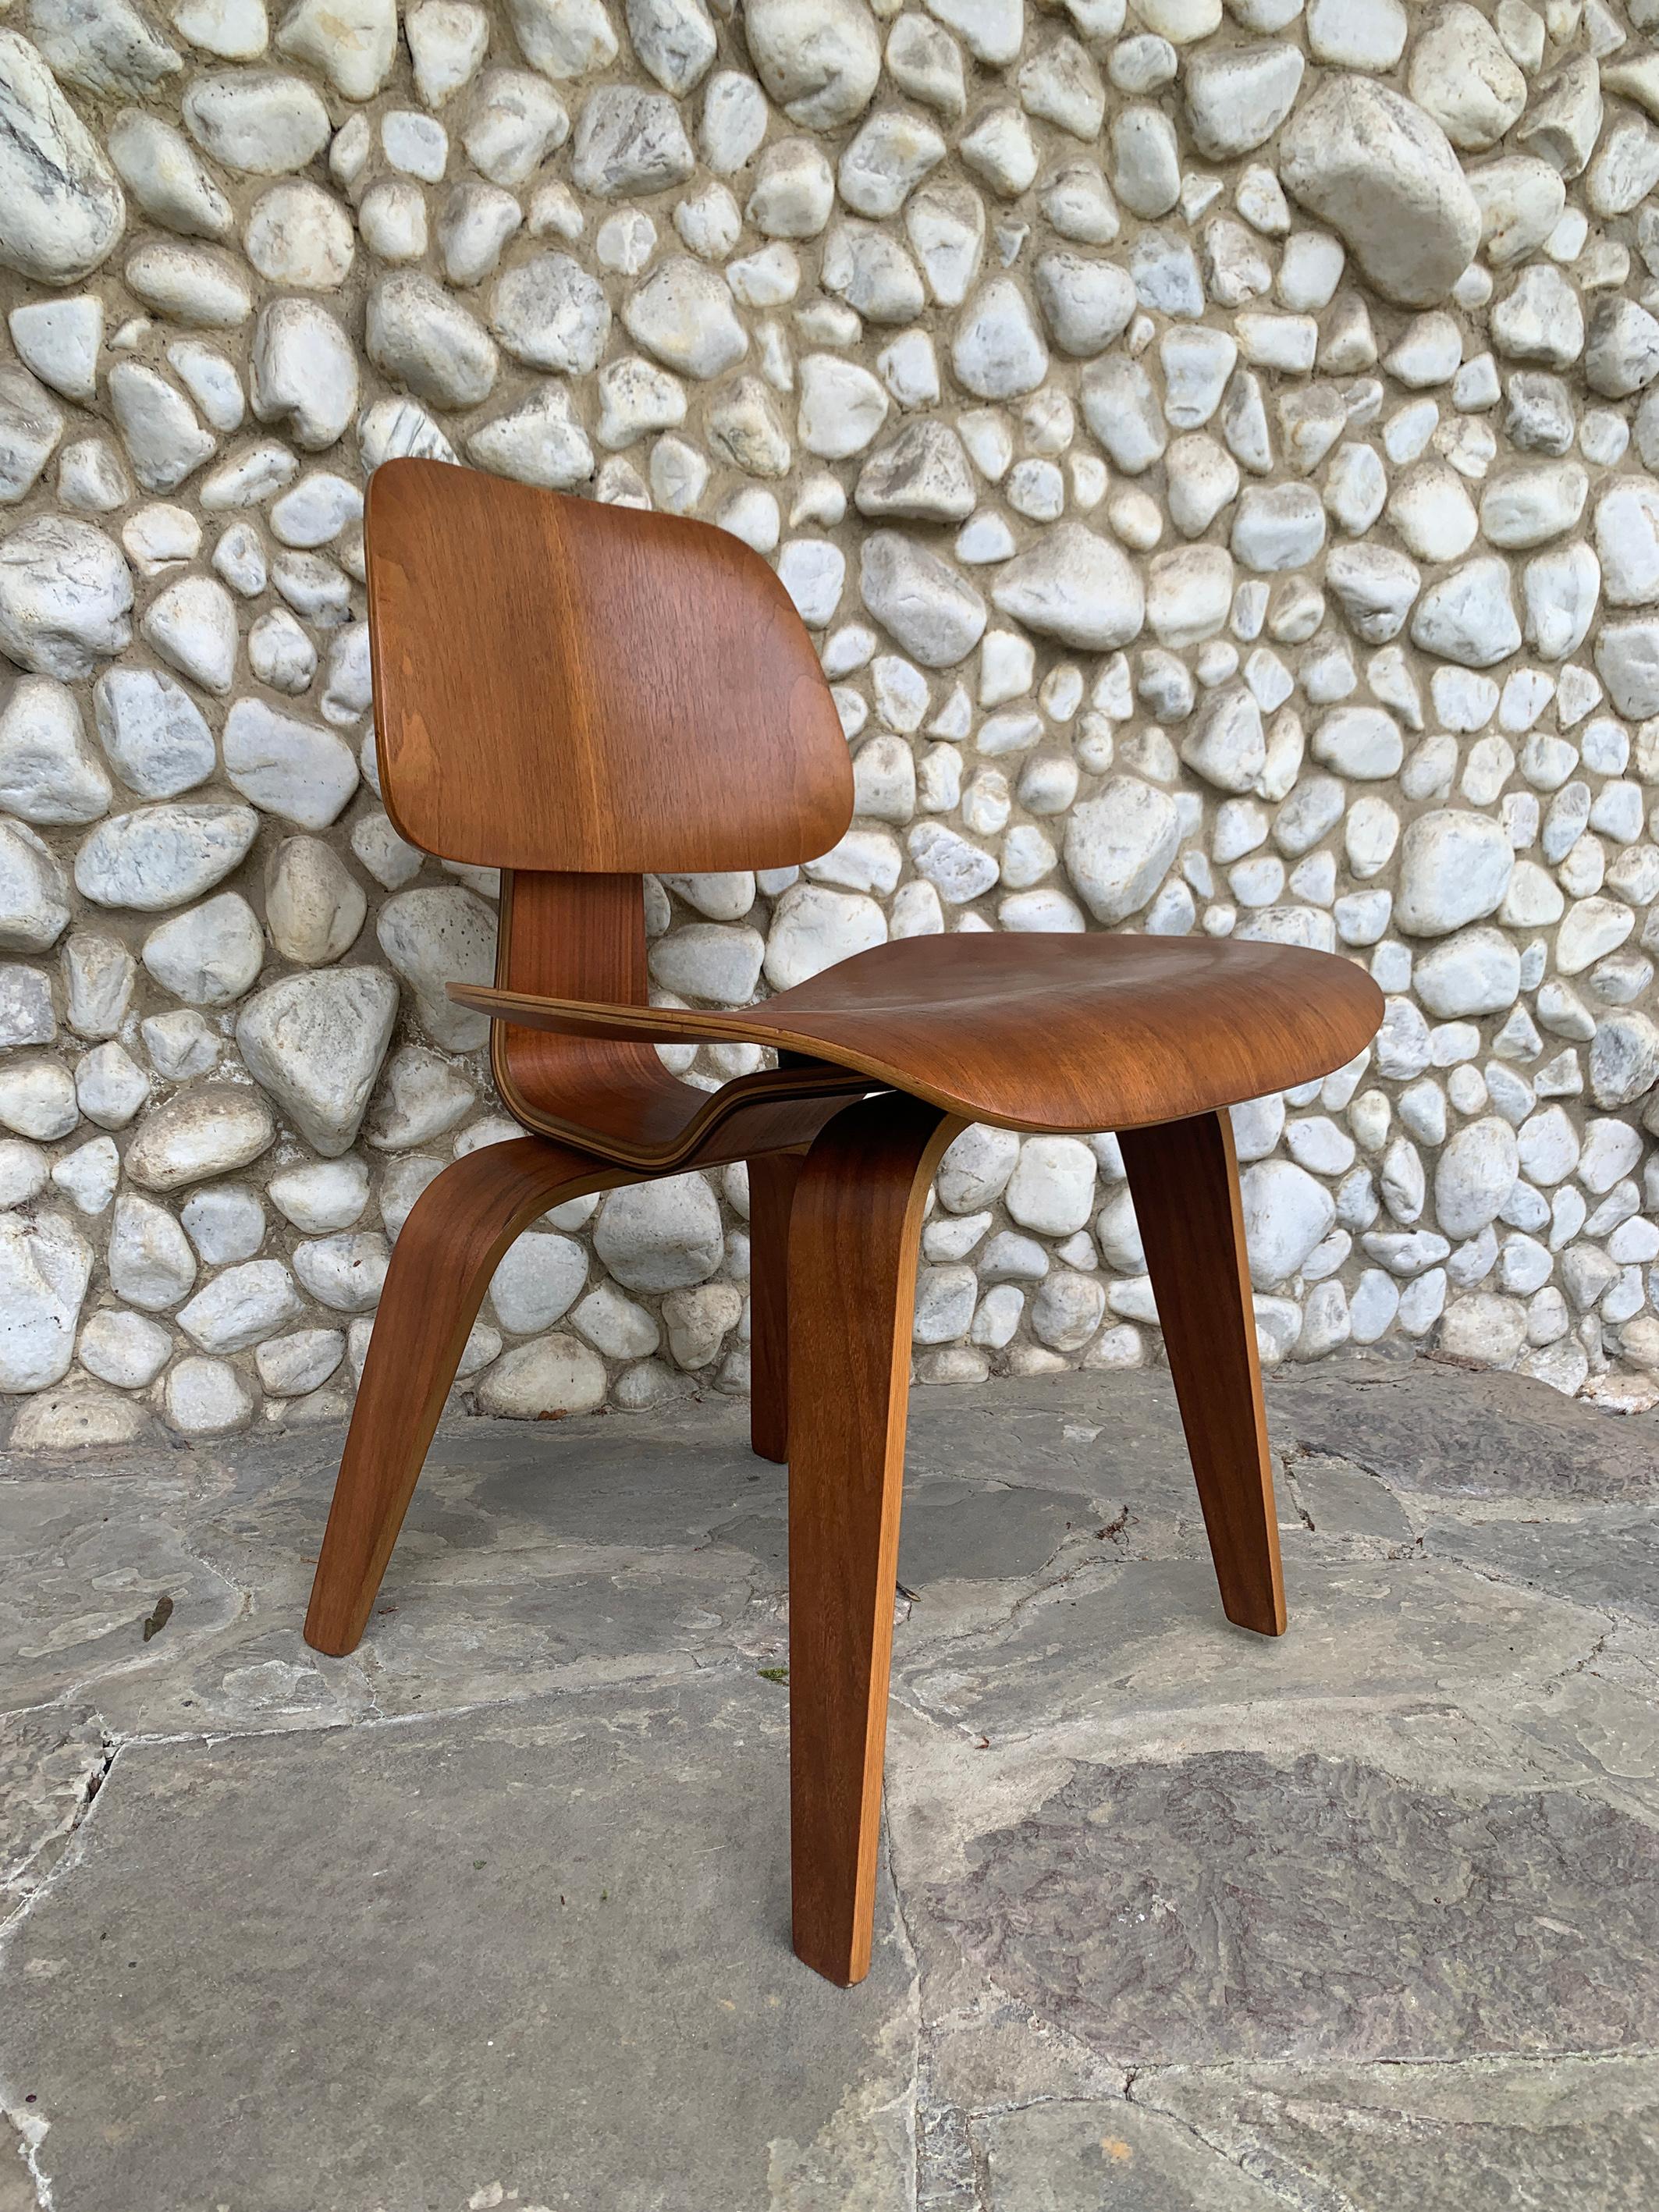 DCW (Dining Chair Wood) chair created by Charles and Ray Eames around 1945.

This is a second generation chair produced by Herman Miller USA between 1950 and 1953 (the production of the DCW was discontinued between 1954 and 1994).

Made of